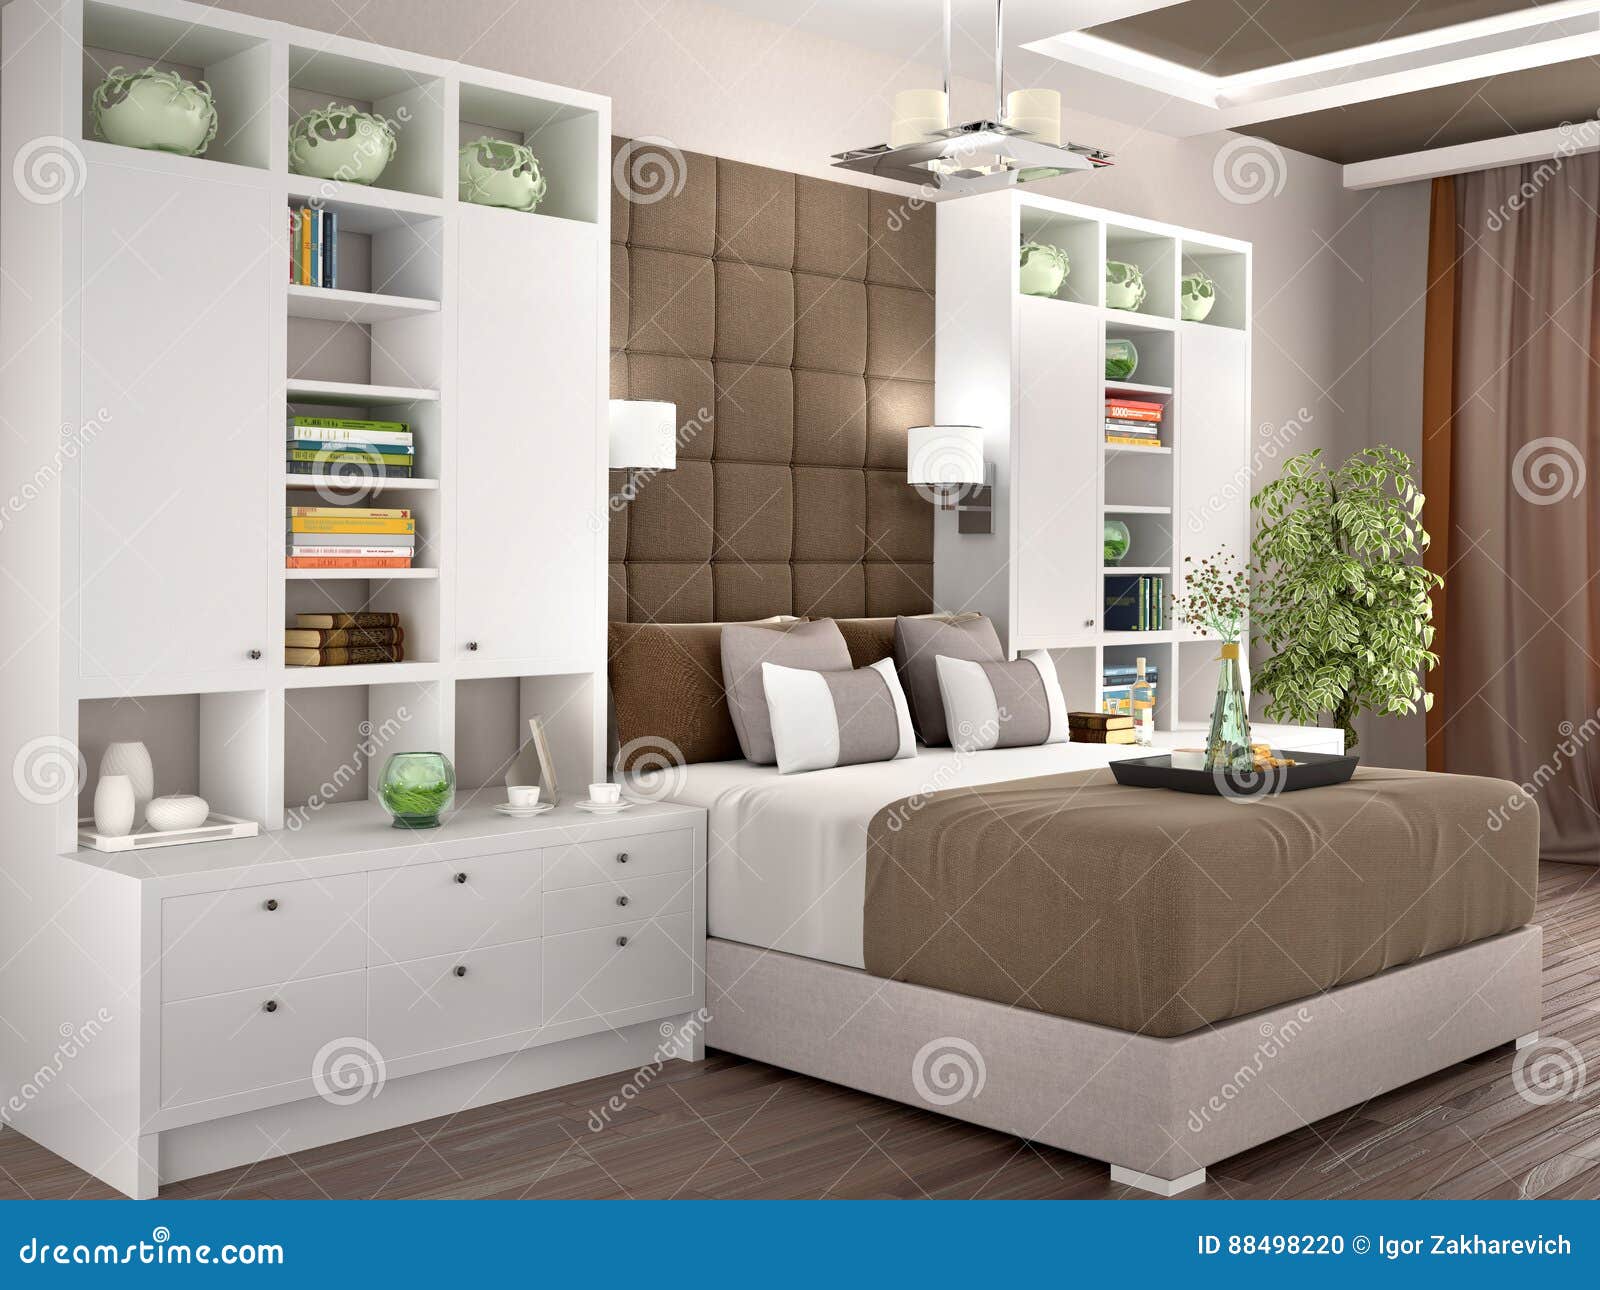 Light And Cozy Modern Bedroom With Wardrobes Stock